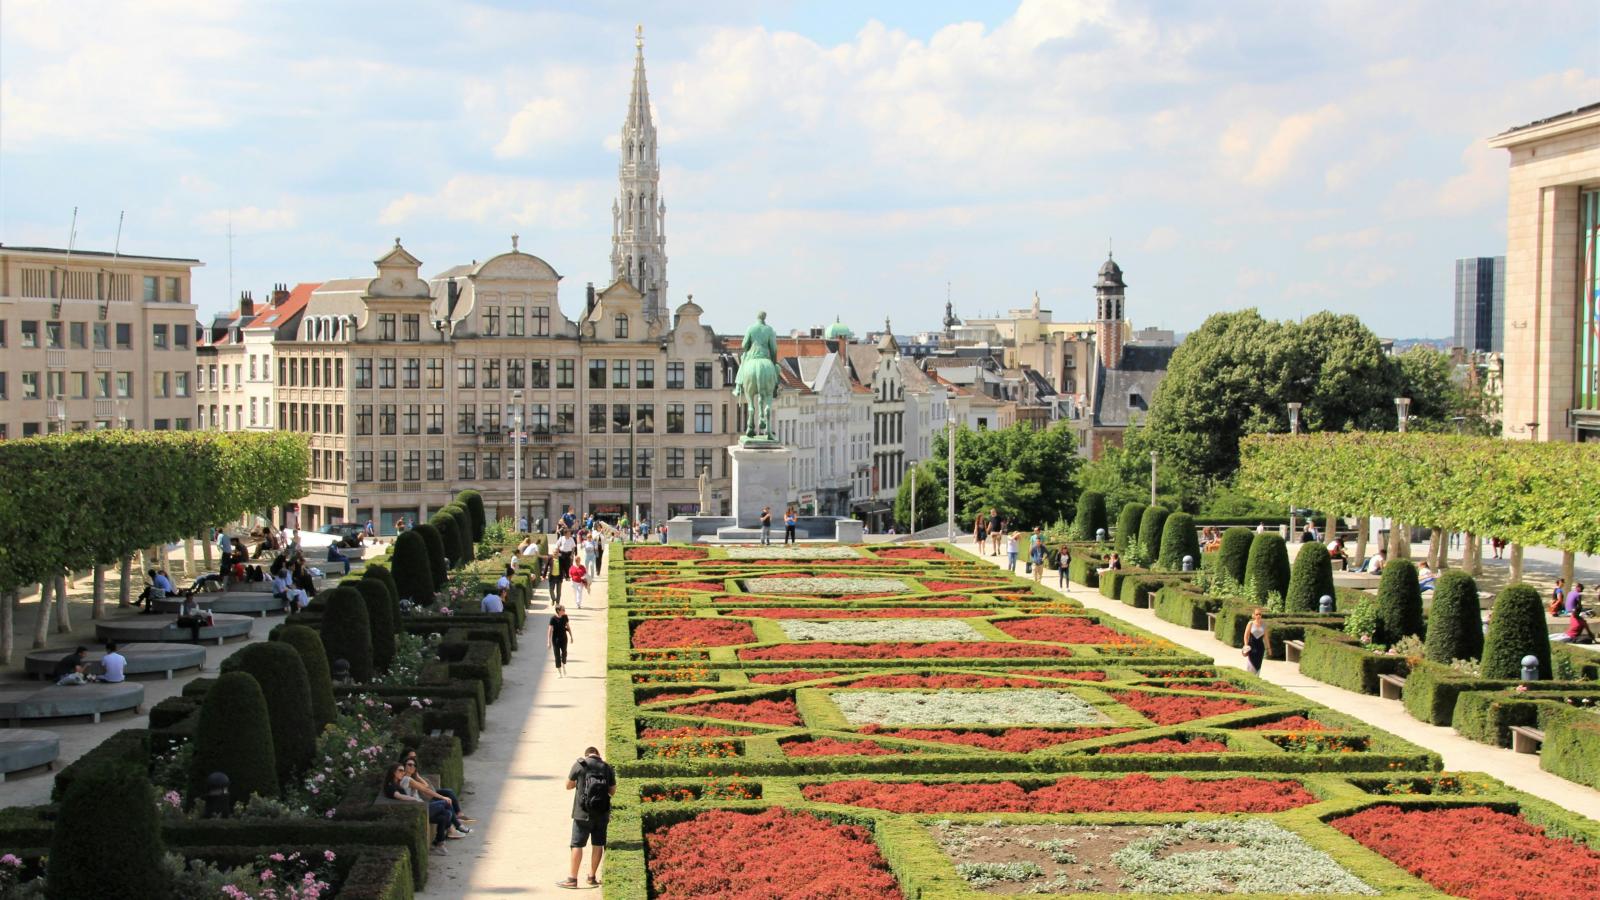 City scape of Brussels with a garden of flowers in foreground